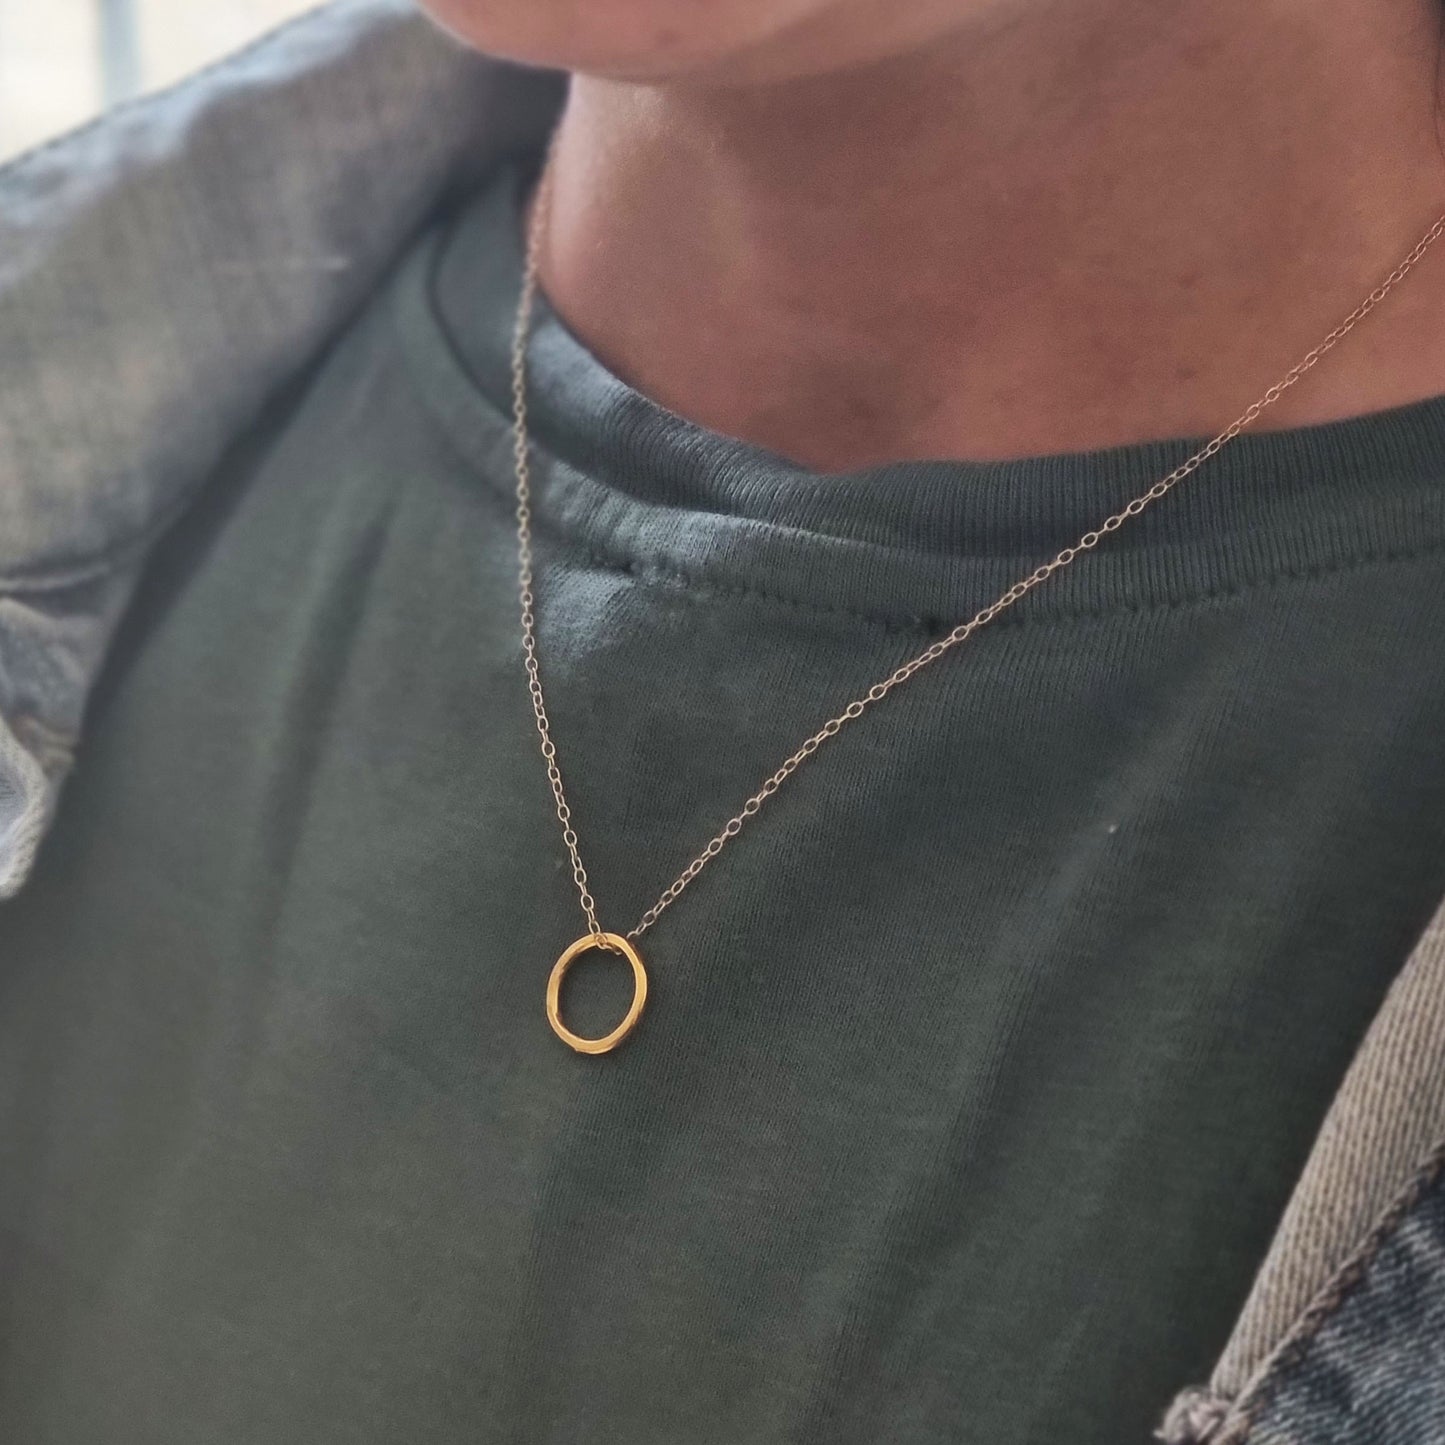 Yellow gold vermeil open circle pendant with hammered texture on a yellow gold vermeil chain. Small, pictured on person.